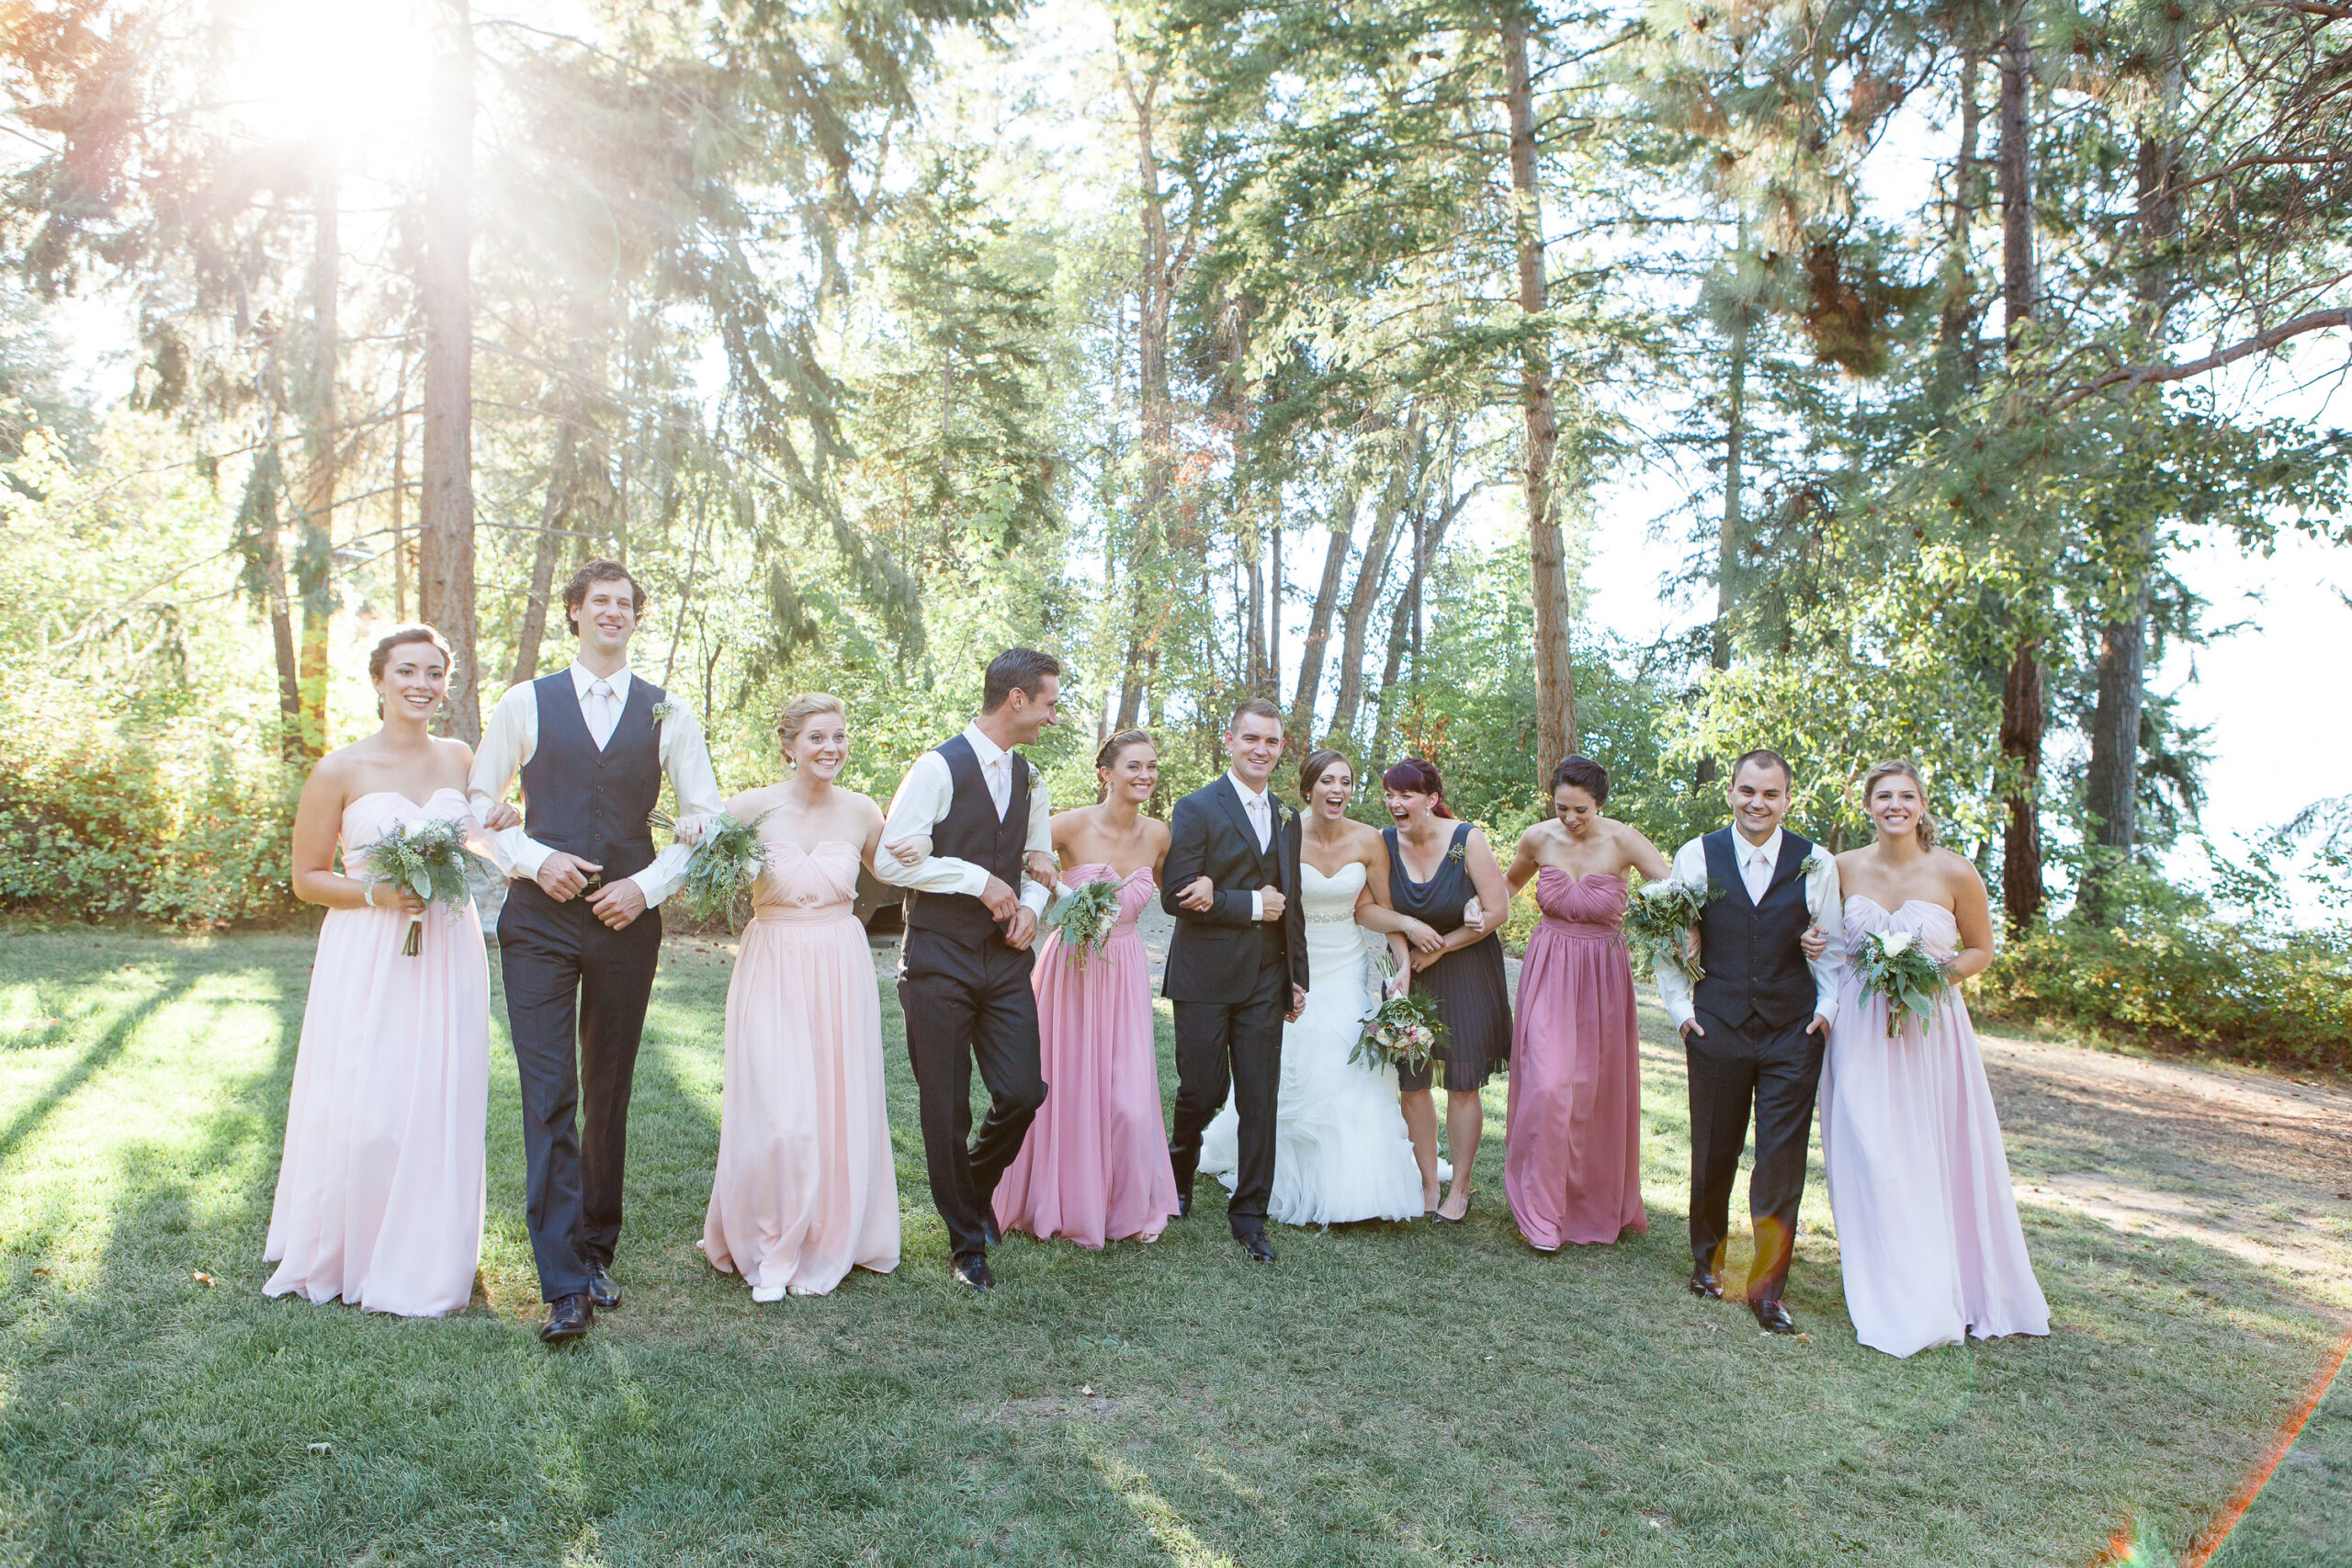 Wedding party walking with their arms linked at Okanagan Wedding Venues